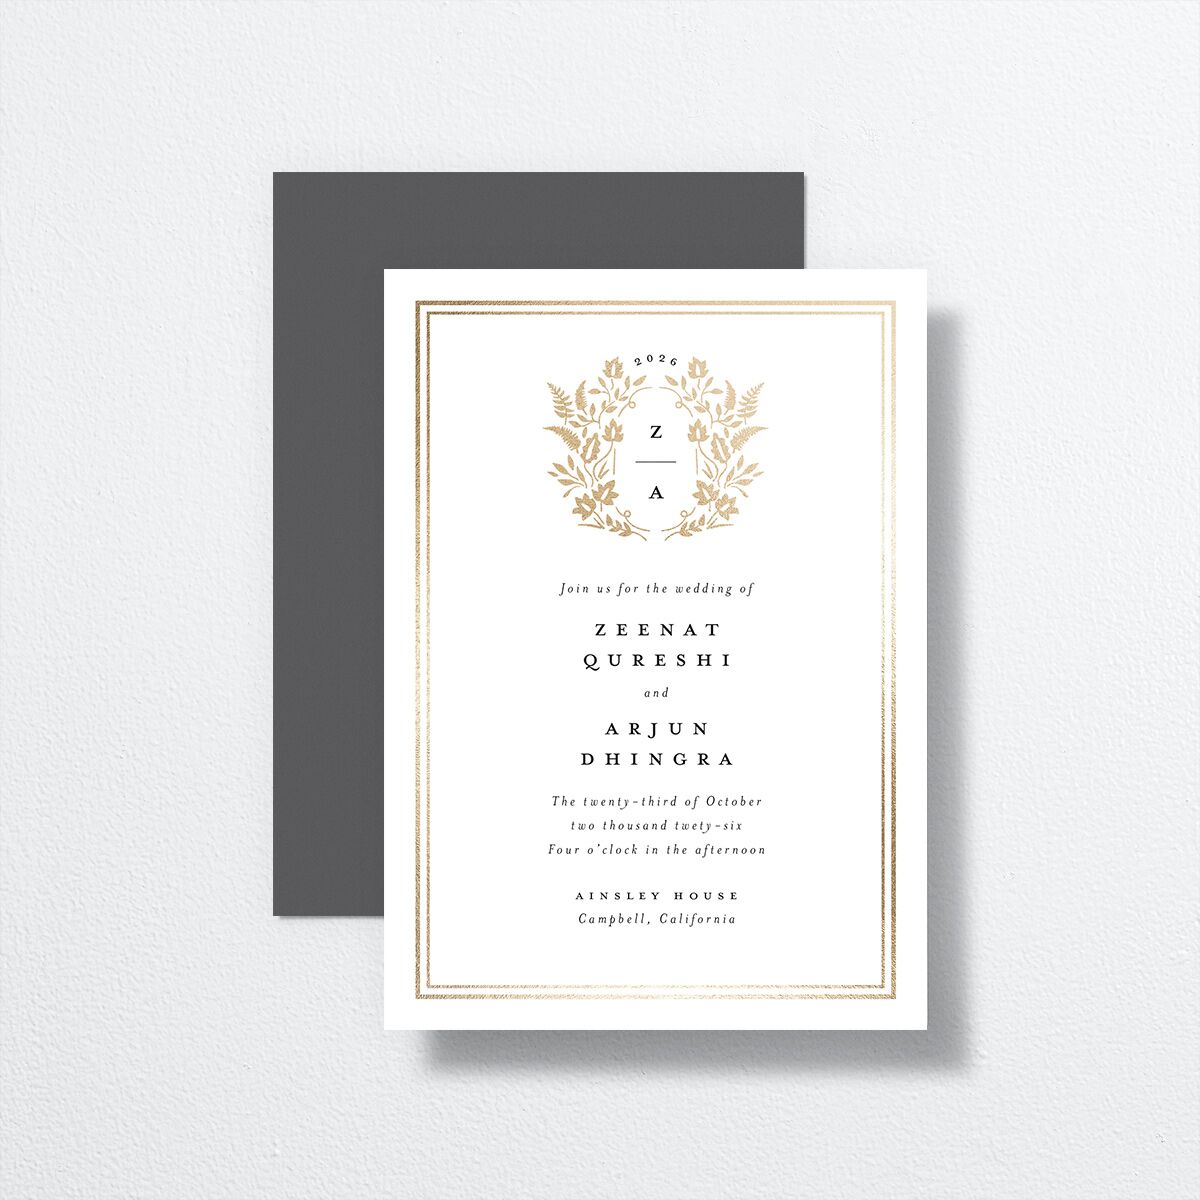 Rustic Kingdom Wedding Invitations front-and-back in grey